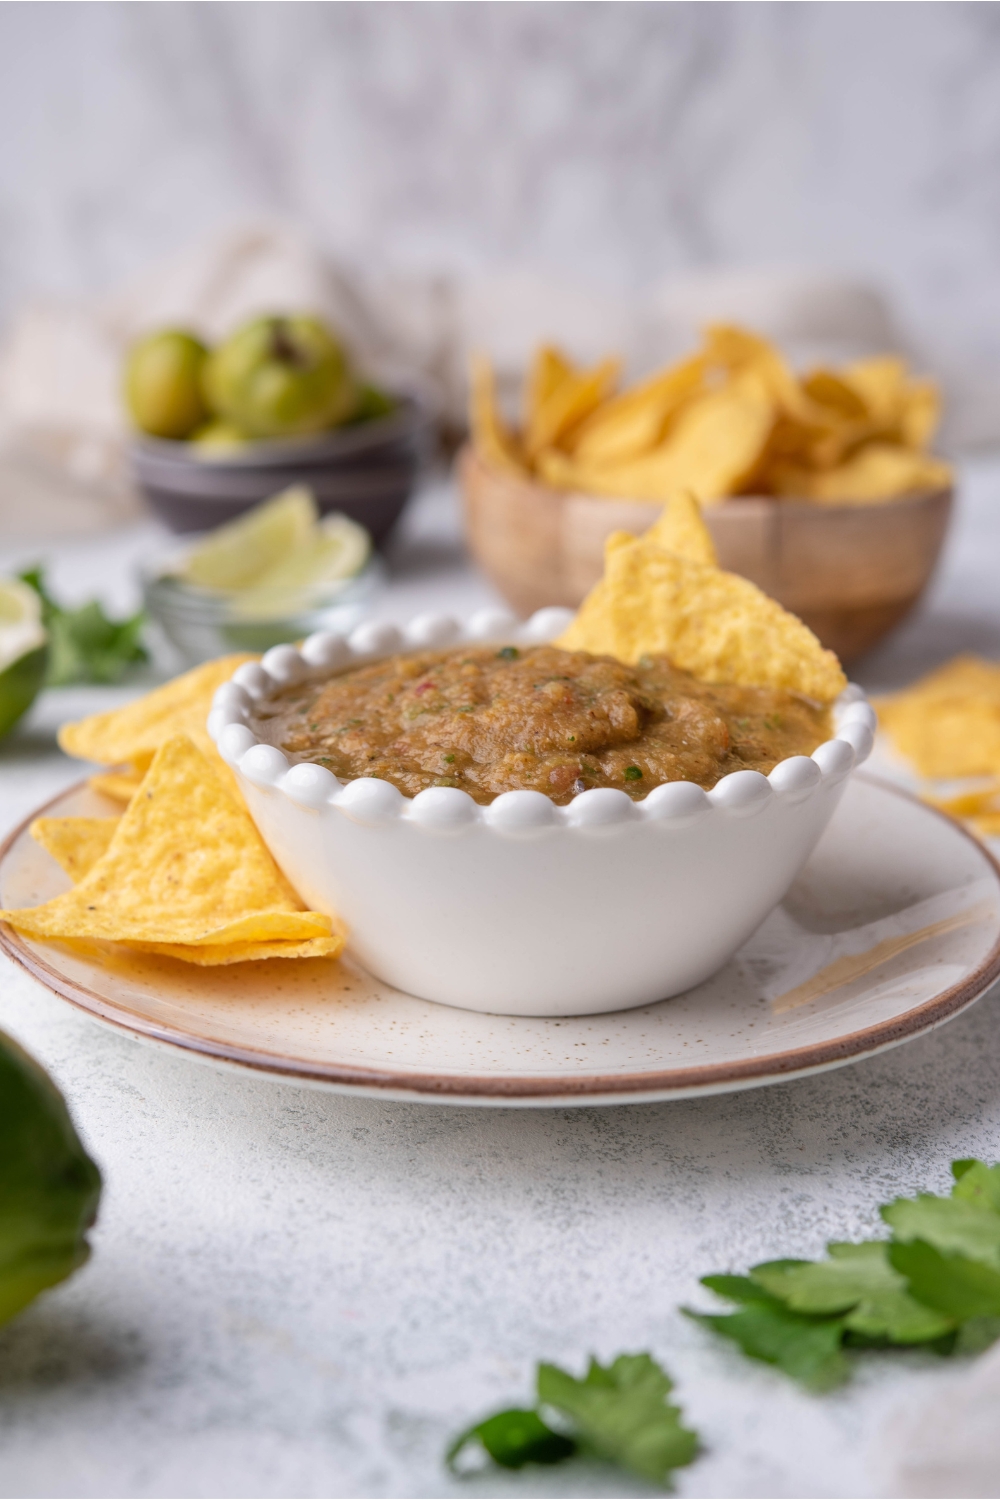 Tomatillo salsa in a small white bowl with tortilla chips in the salsa. The bowl is on top of a plate filled with tortilla chips. In the background there is a bowl of tomatillos and a bowl of tortilla chips.